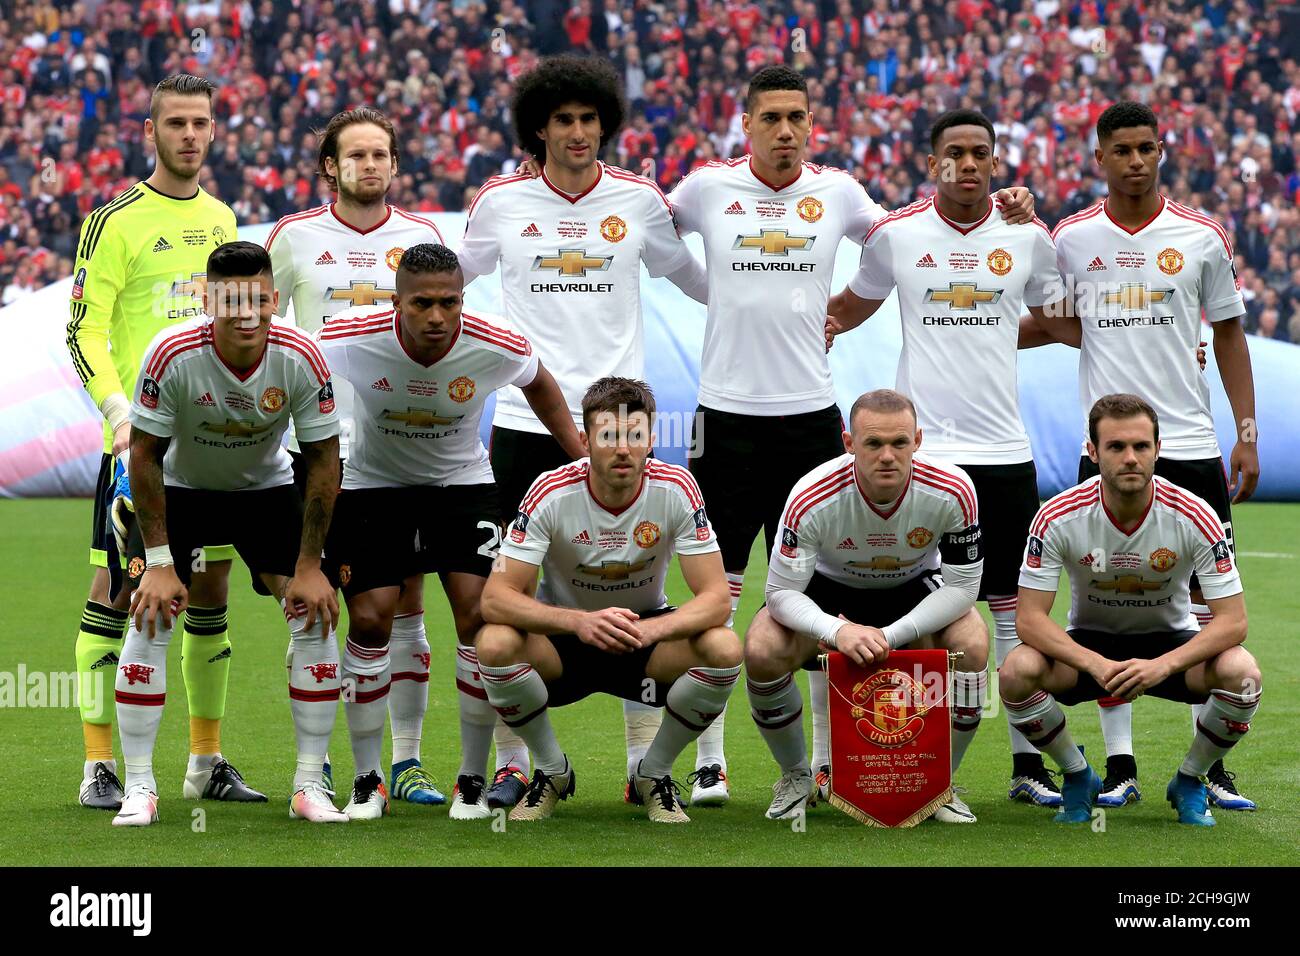 Manchester United team group (L - R Top) Manchester United goalkeeper David De Gea, Daley Blind, Marouane Fellaini, Chris Smalling, Anthony Martial and Marcus Rashford. (L - R Bottom) Marcos Rojo, Antonio Valencia, Michael Carrick, Wayne Rooney and Jaun Mata during the Emirates FA Cup Final at Wembley Stadium. PRESS ASSOCIATION Photo. Picture date: Saturday May 21, 2016. See PA story SOCCER Final. Photo credit should read: Nick Potts/PA Wire. RESTRICTIONS: No use with unauthorised audio, video, data, fixture lists, club/league logos or 'live' services. Online in-match use li Stock Photo